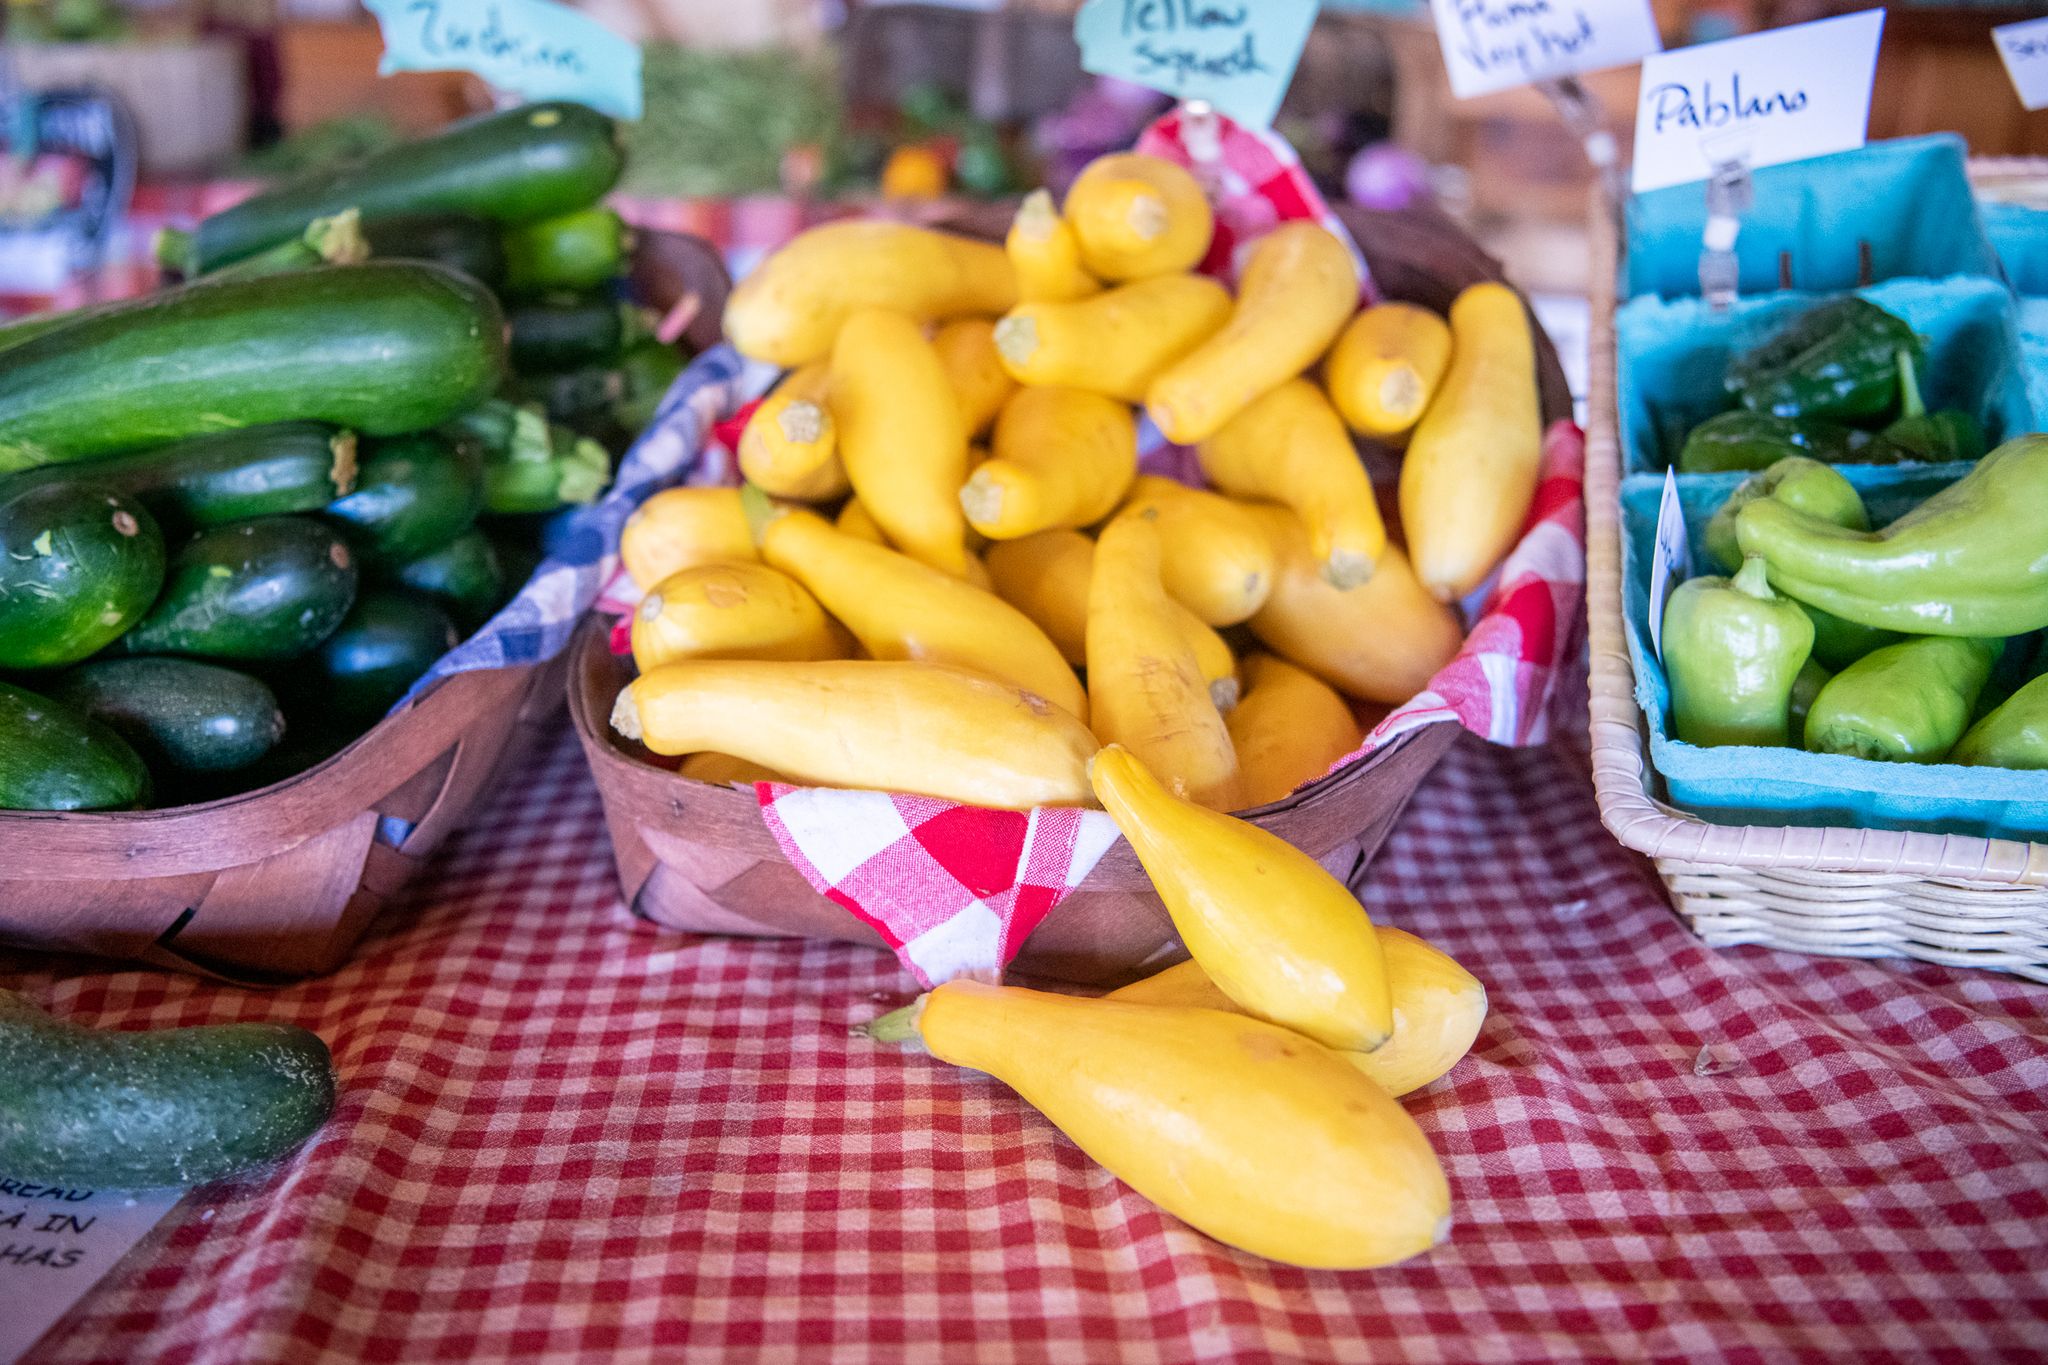 Fresh squash and produce at the Ingram's Family Farm table.